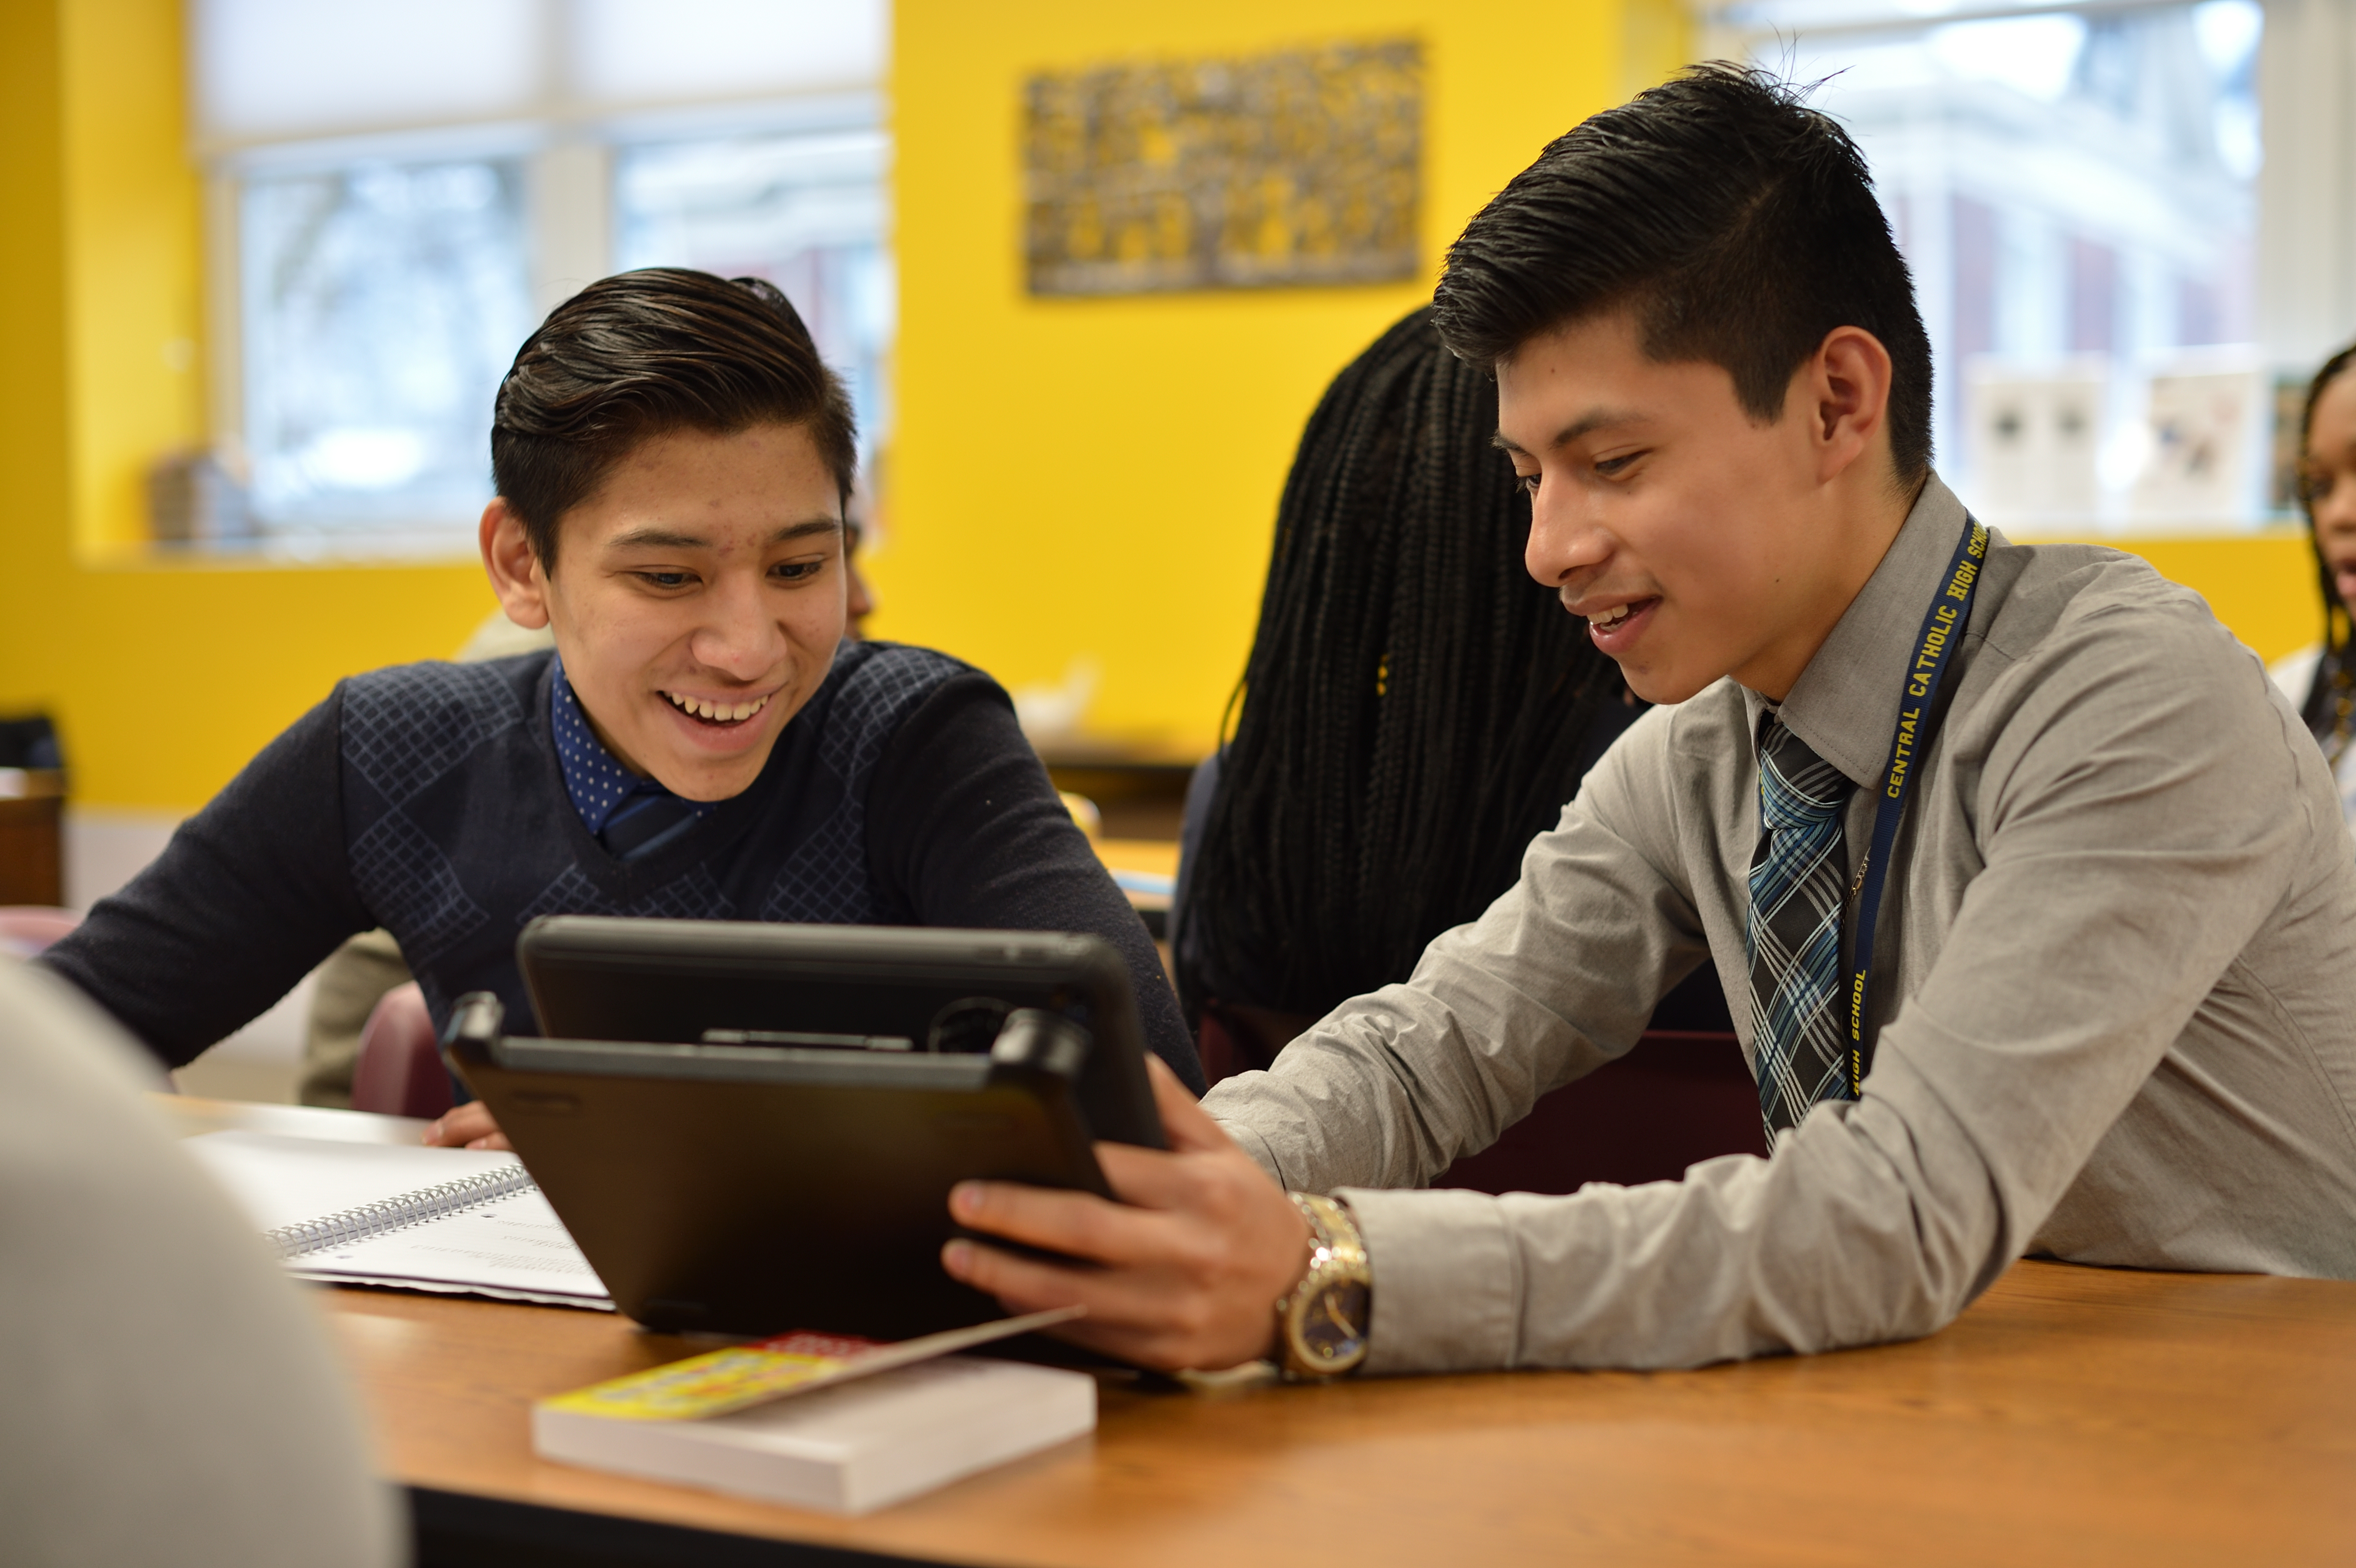 Two students looking and smiling at a tablet together